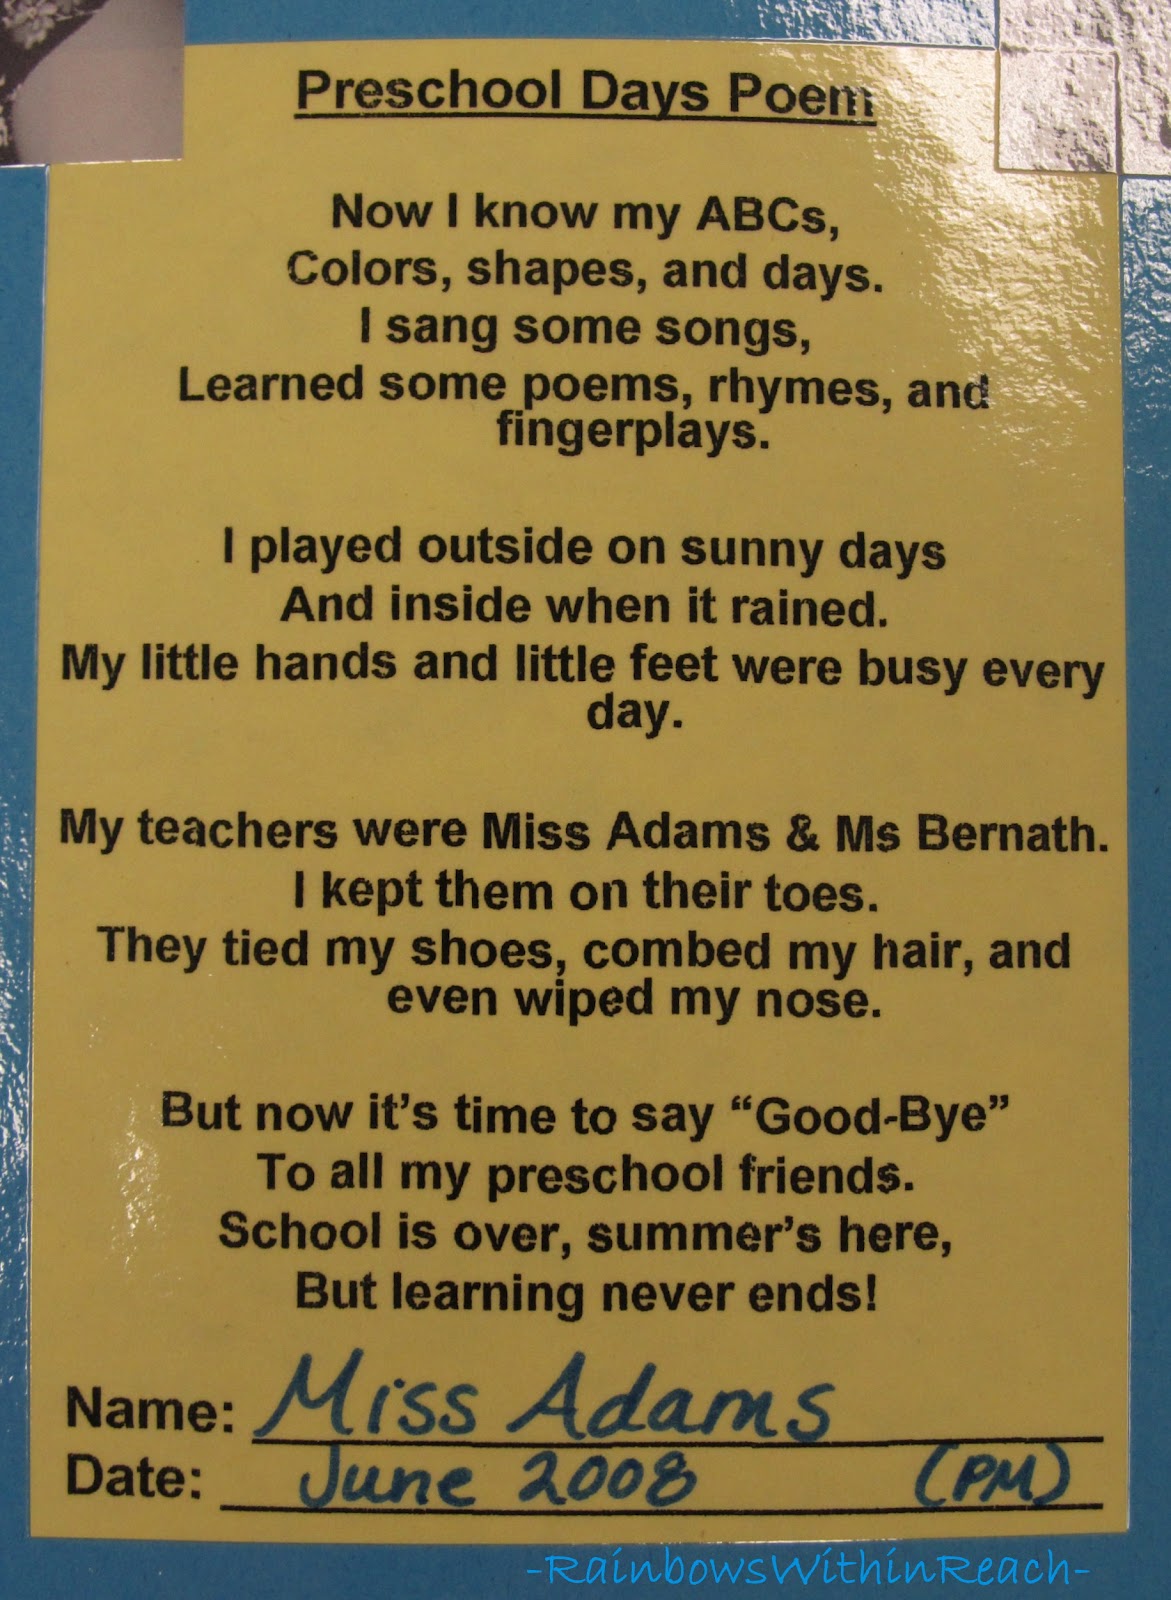 Poem about the end of preschool days from a teacher to a student